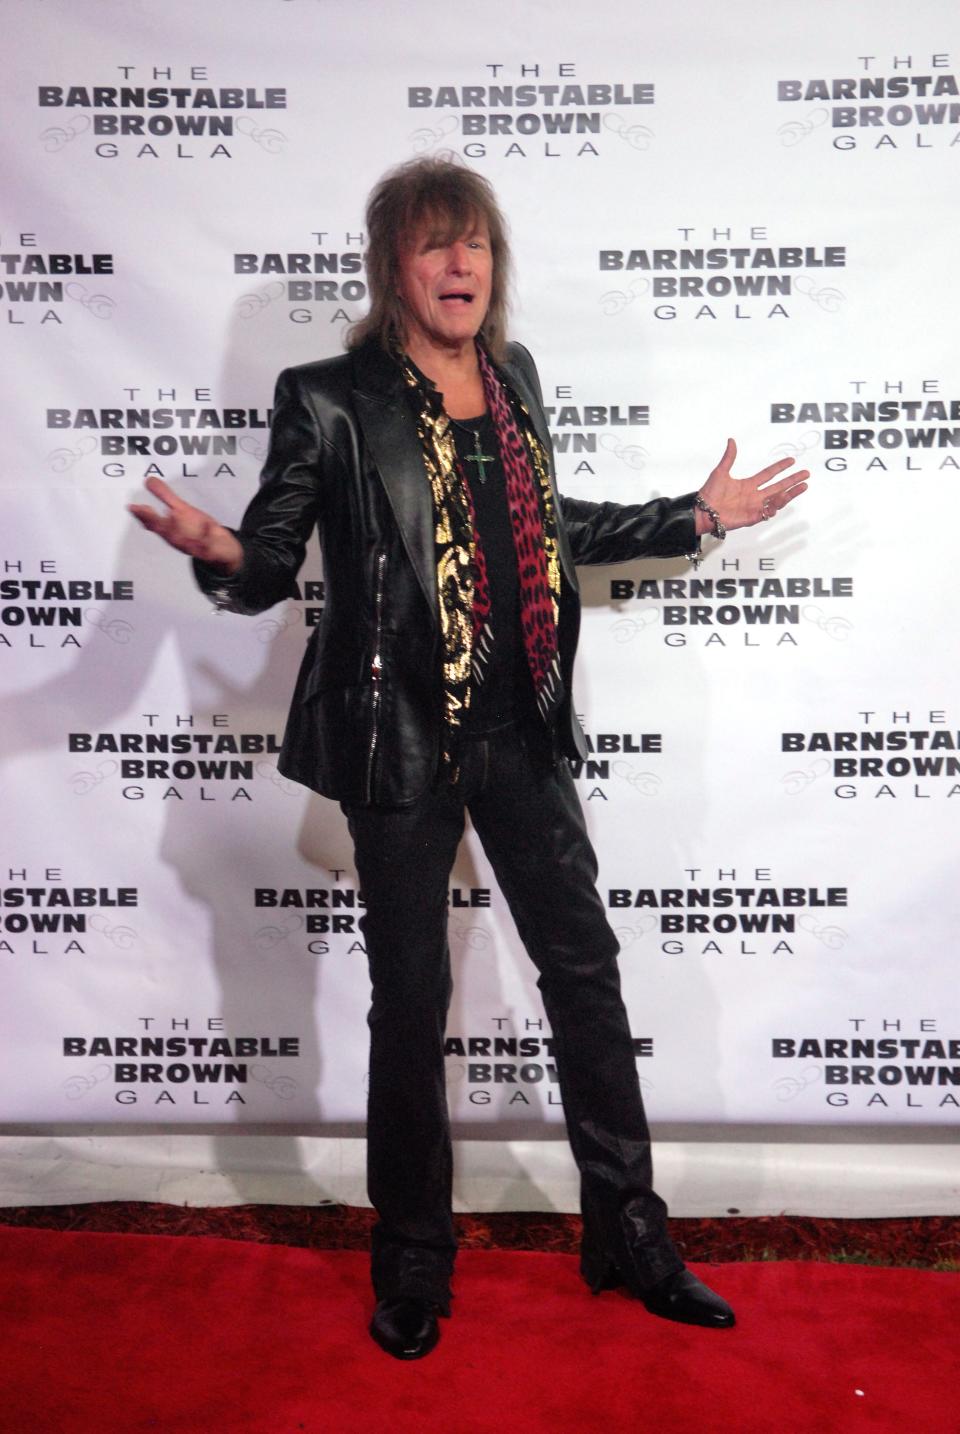 Bon Jovi guitarist Richie Sambora is shown on the red carpet in 2022 at the Barnstable Brown Gala Friday night in Louisville. Kentucky.